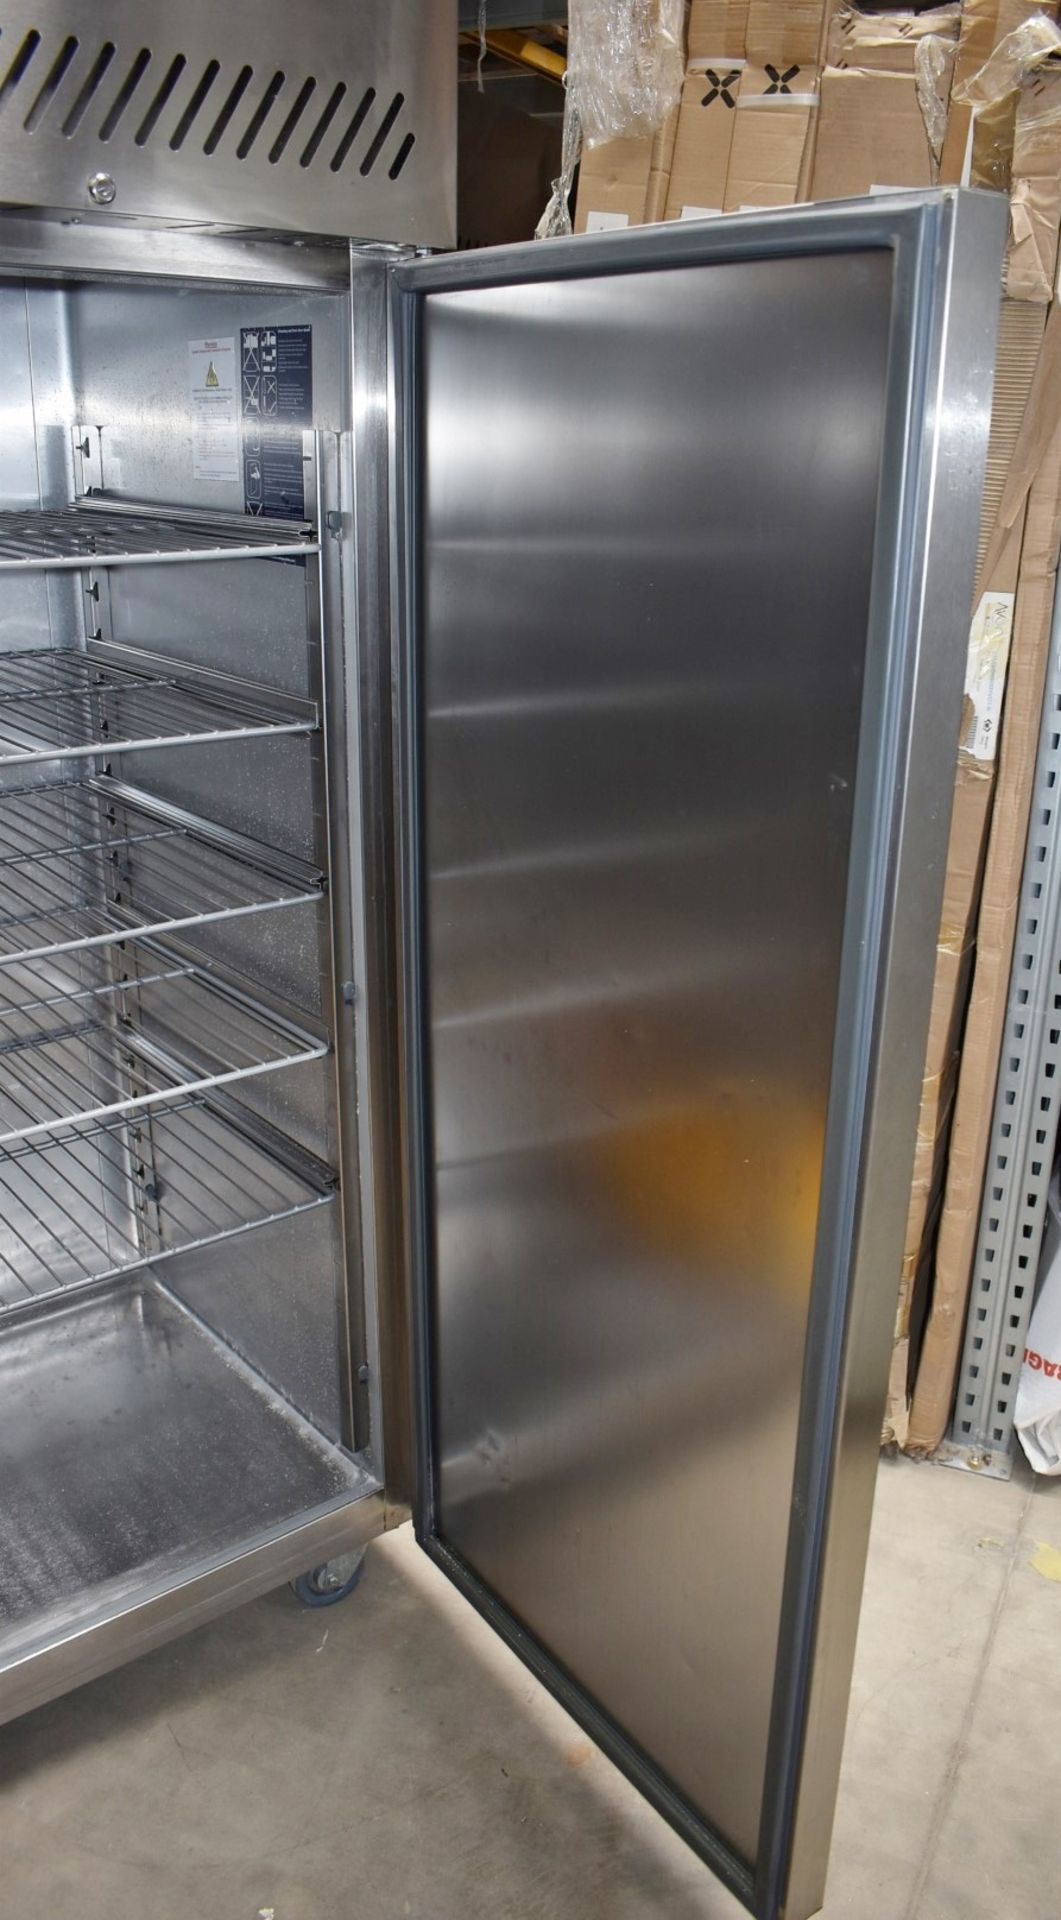 1 x Williams Double Door Upright Refrigerator - Model MJ2SA - Complete With Internal Shelves - - Image 7 of 15